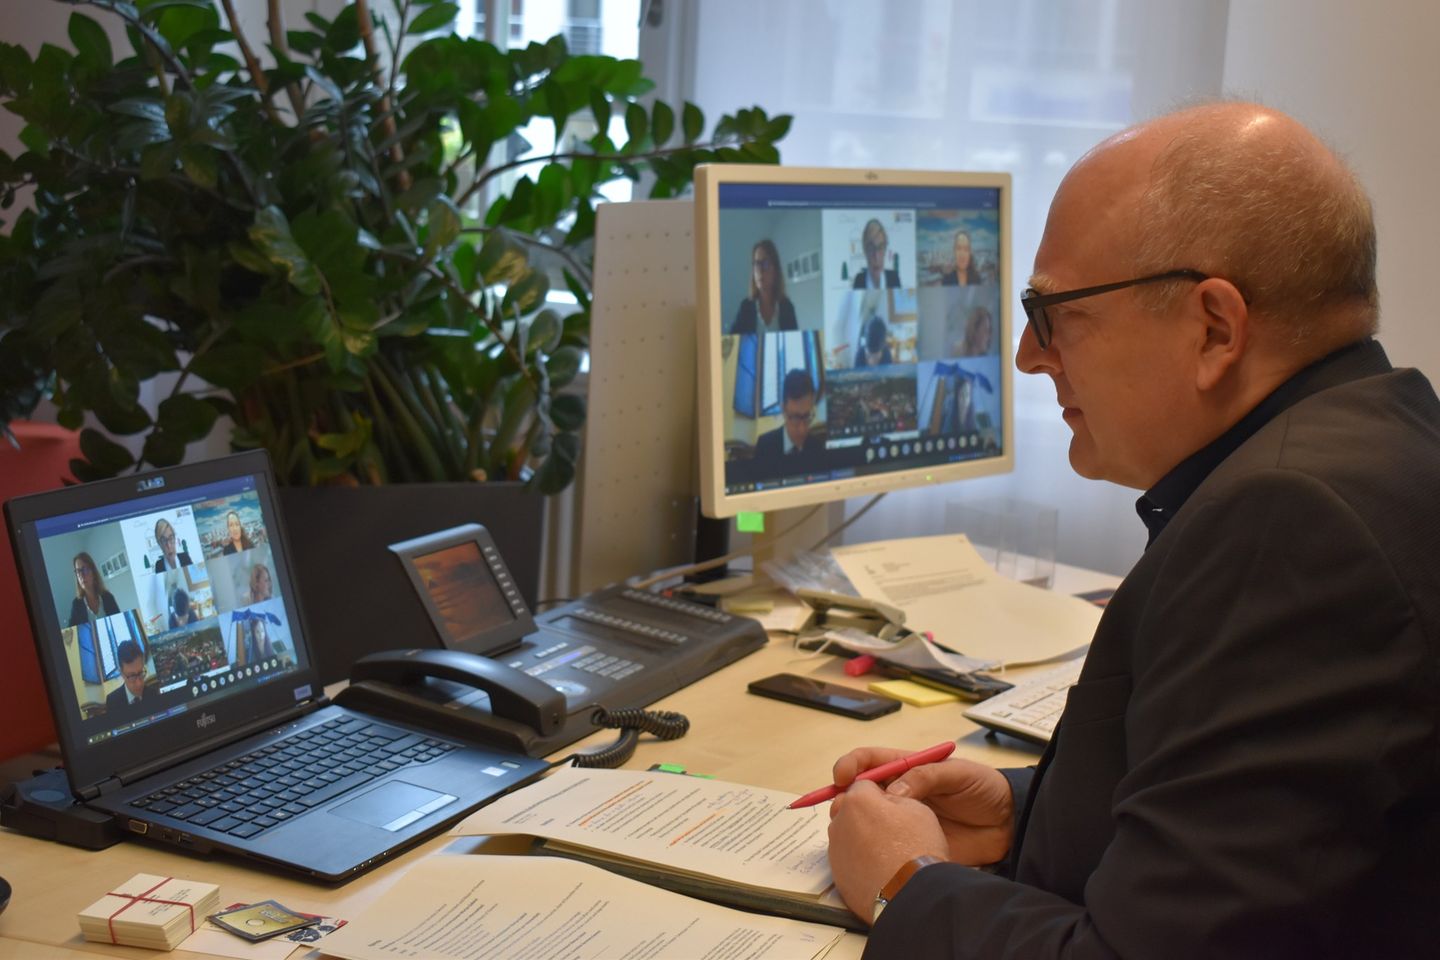 Mayor Sven Schulze at the video conference with his counterparts and the EU Commissioner